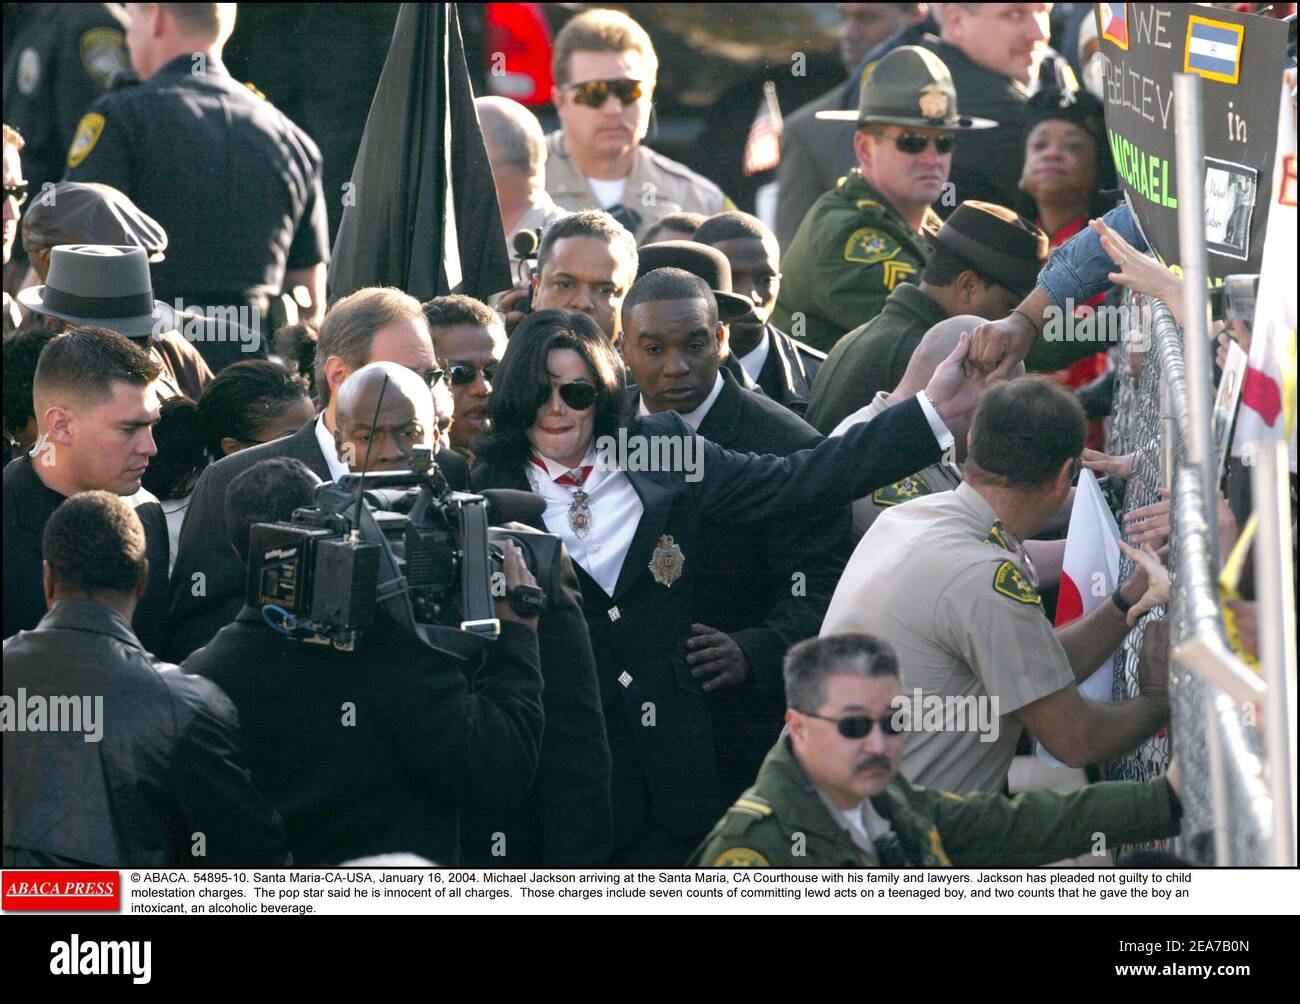 © ABACA. 54895-10. Santa Maria-CA-USA, January 16, 2004. Michael Jackson arriving at the Santa Maria, CA Courthouse with his family and lawyers. Jackson has pleaded not guilty to child molestation charges. The pop star said he is innocent of all charges. Those charges include seven counts of committing lewd acts on a teenaged boy, and two counts that he gave the boy an intoxicant, an alcoholic beverage. Stock Photo